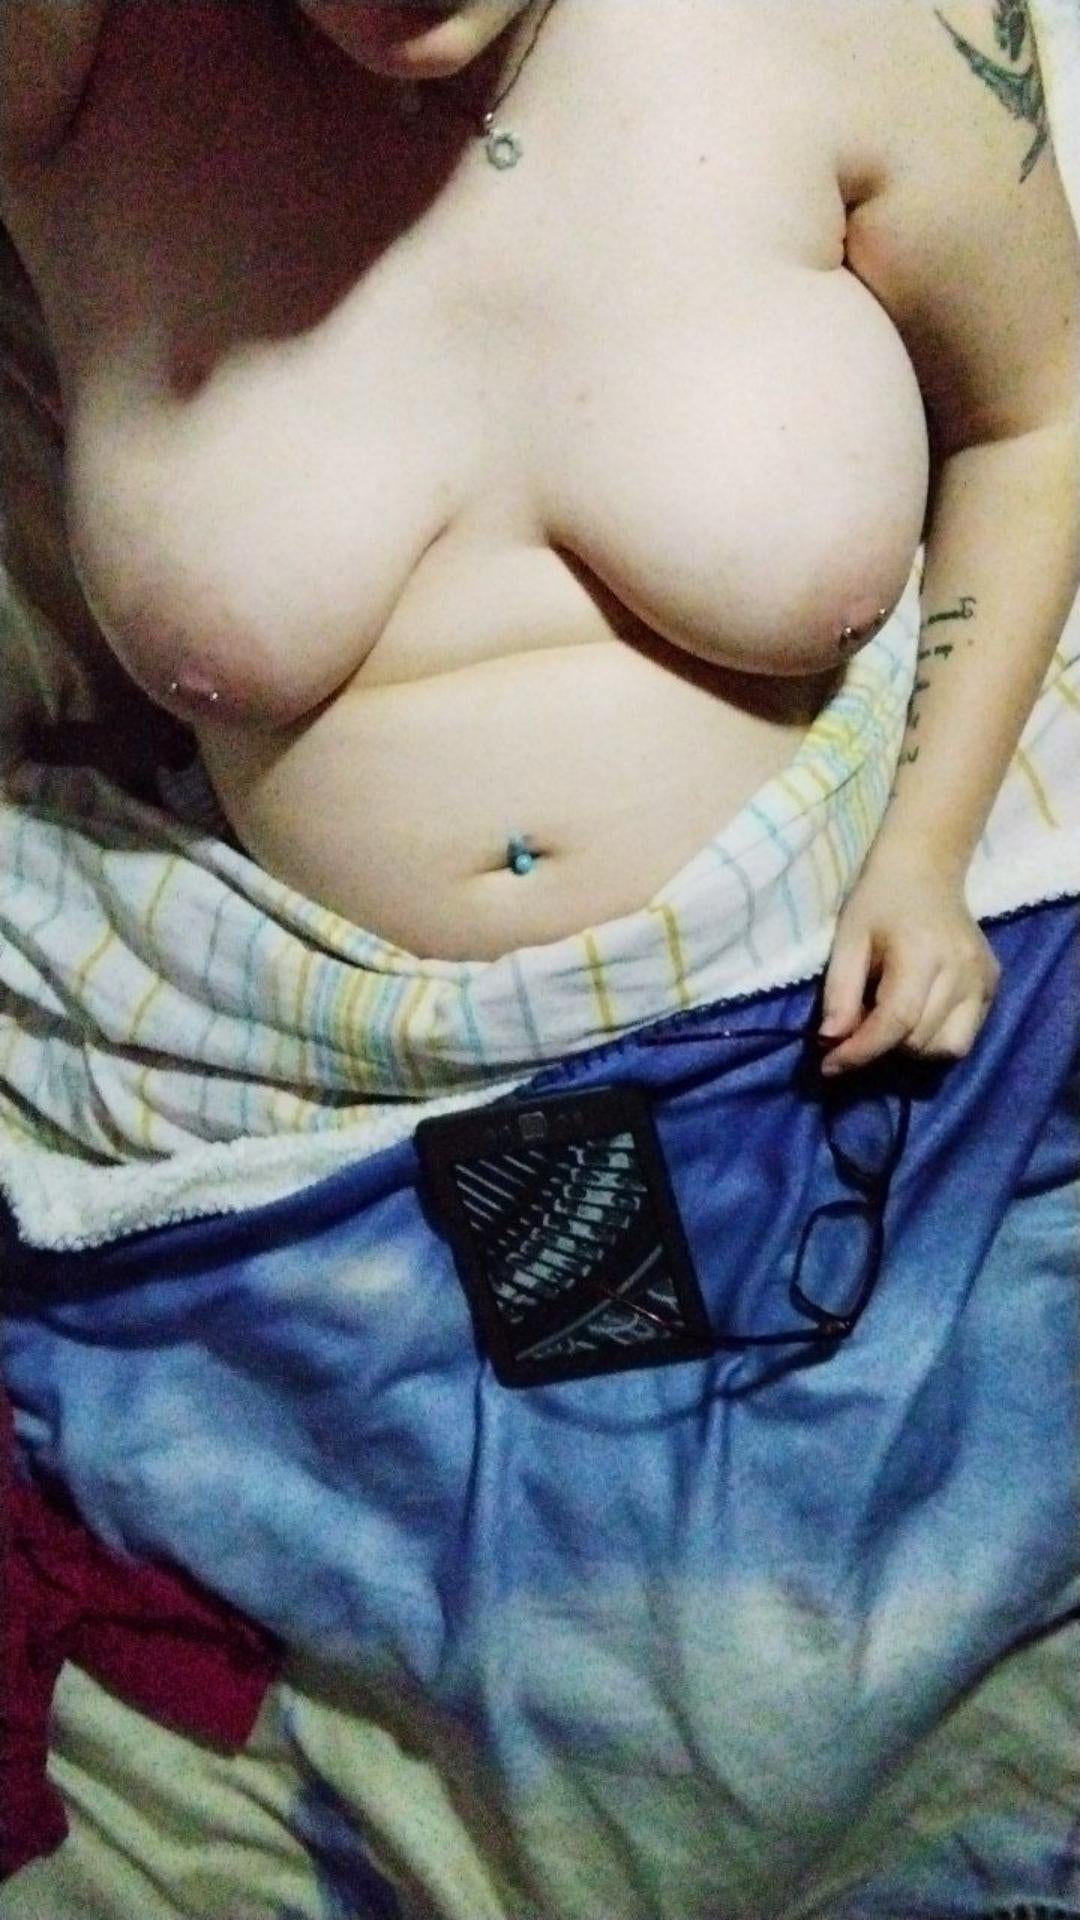 Chubby Big Tits -  The weather report says temperatures will drop here, so a blanket and a book is a good idea this night. (F)